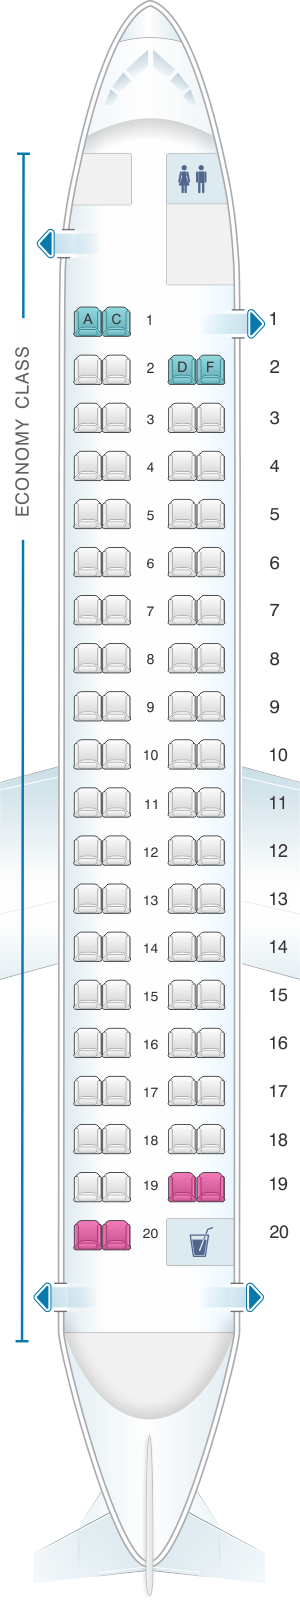 Seat map for Brussels Airlines Bombardiers DH8-Q400